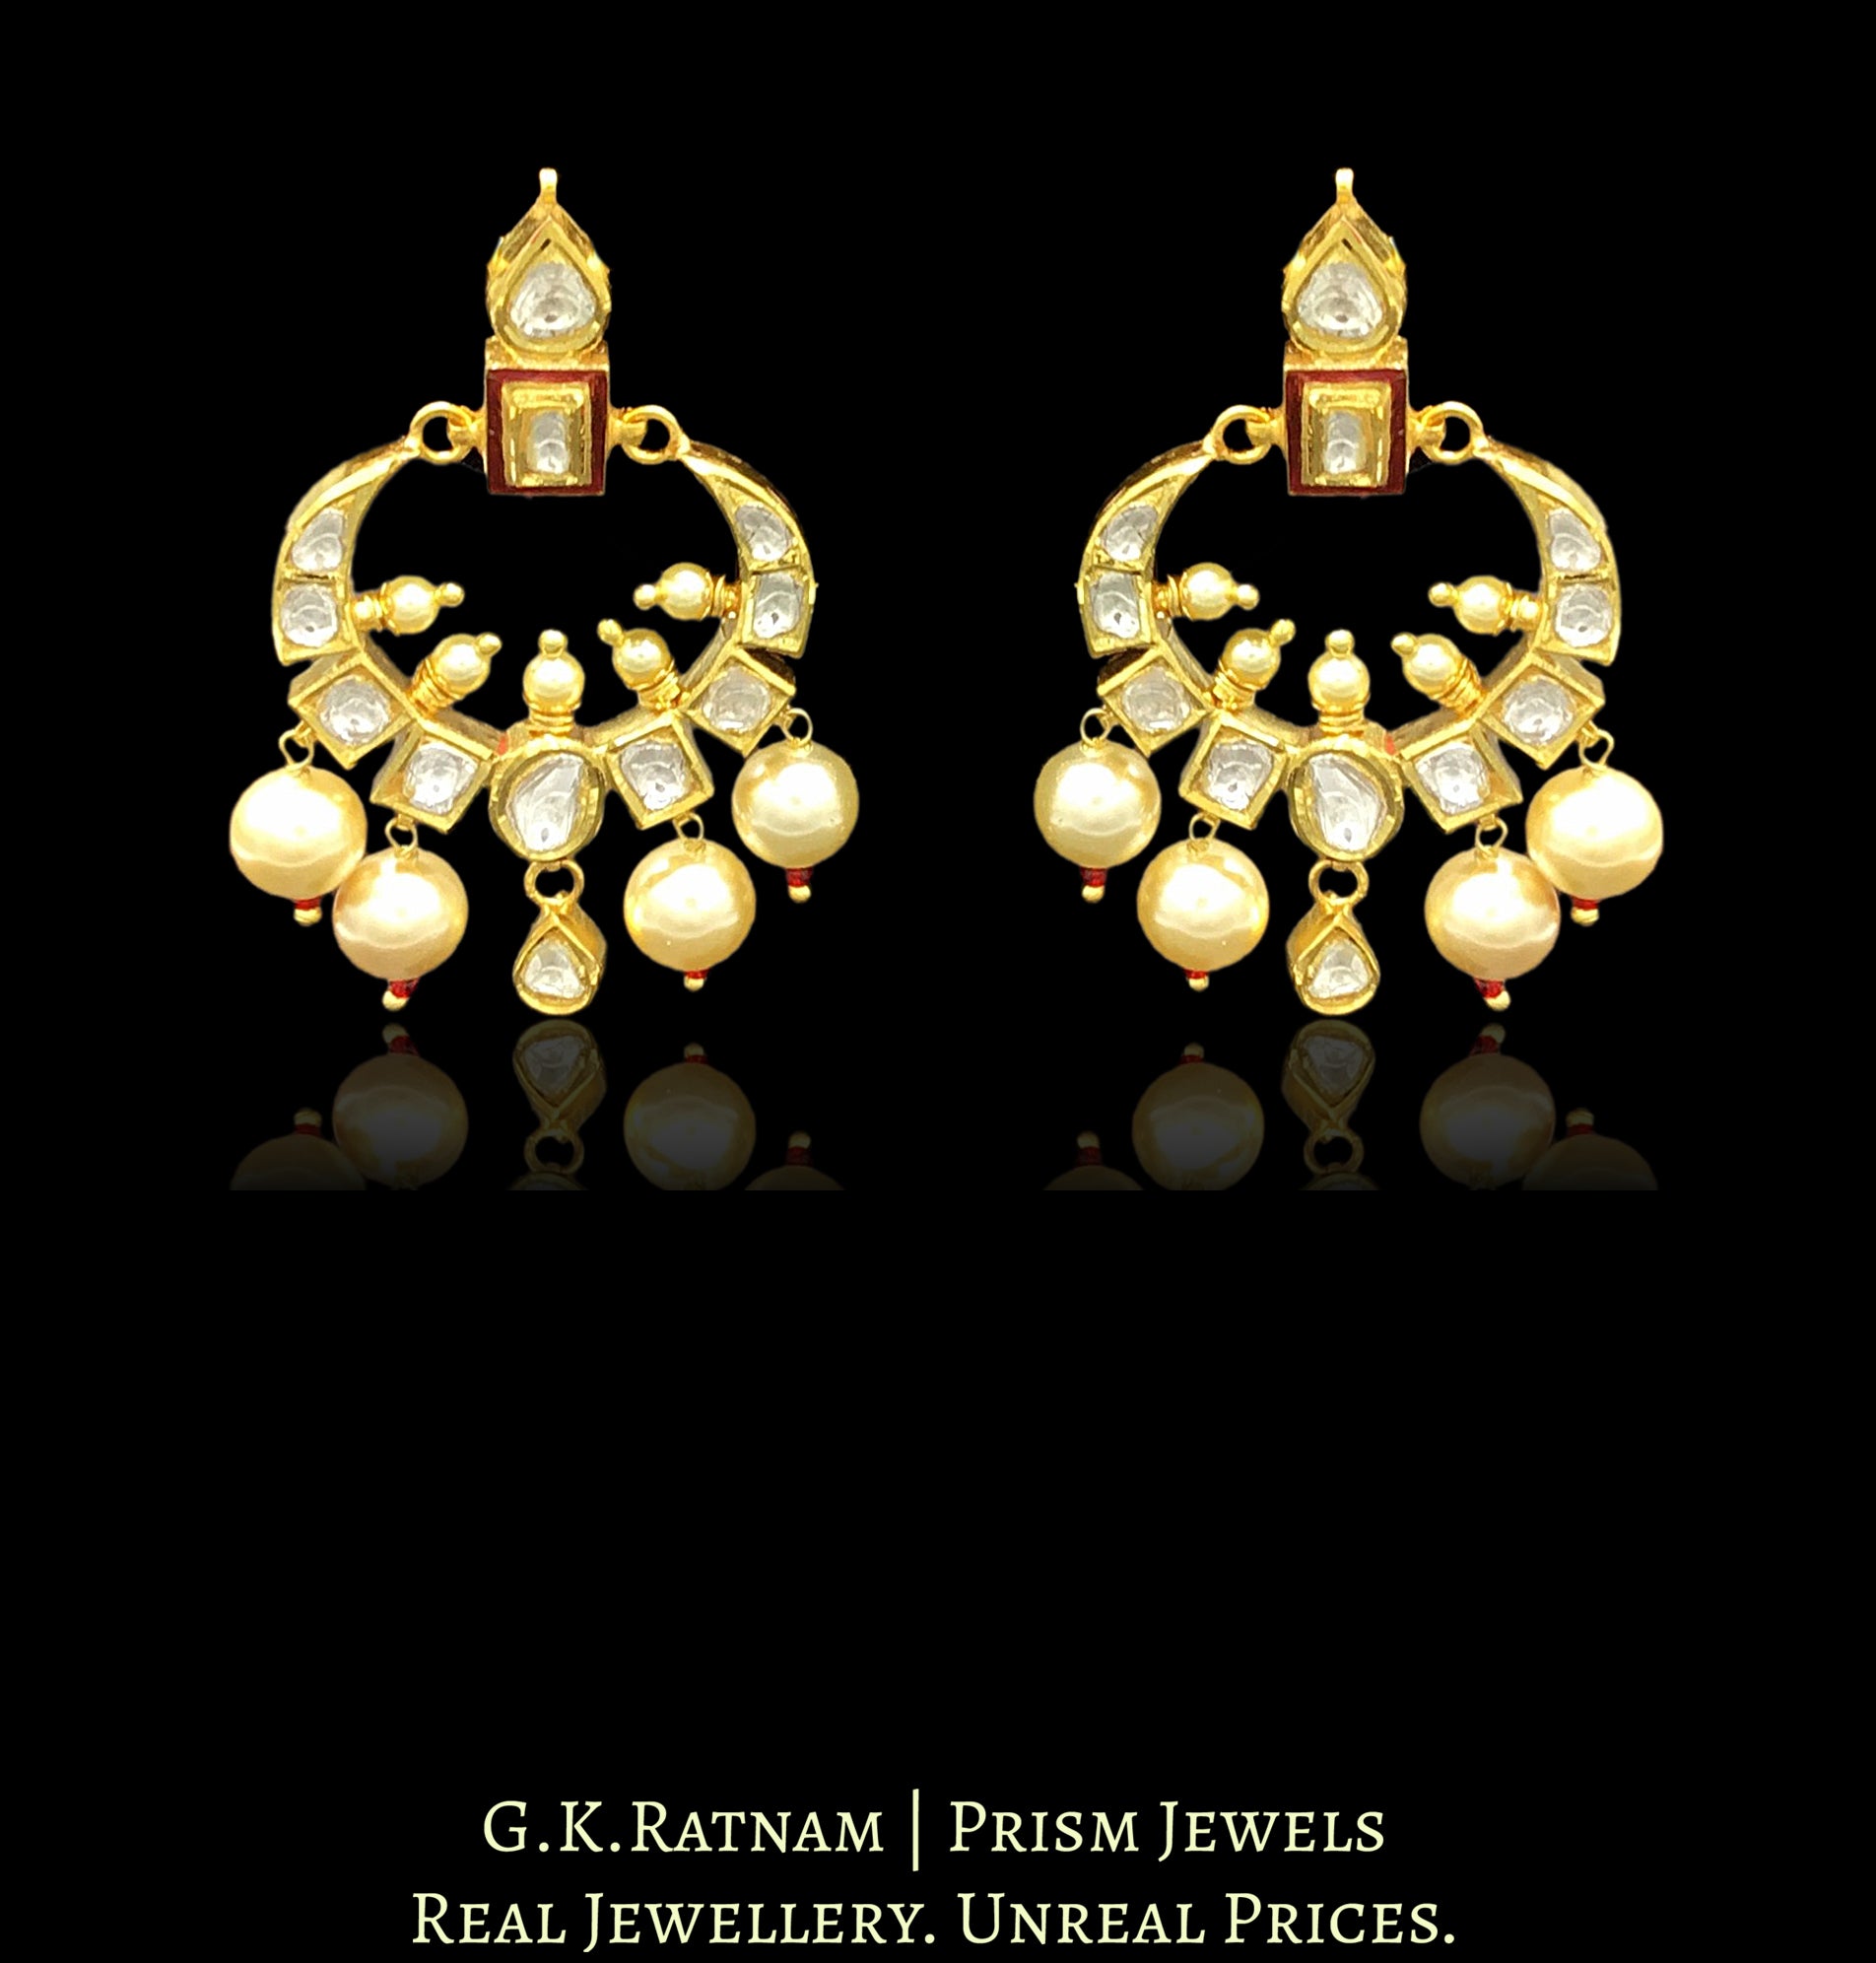 18k Gold and Diamond Polki Small Chand Bali Earring Pair with Red Enamel - G. K. Ratnam